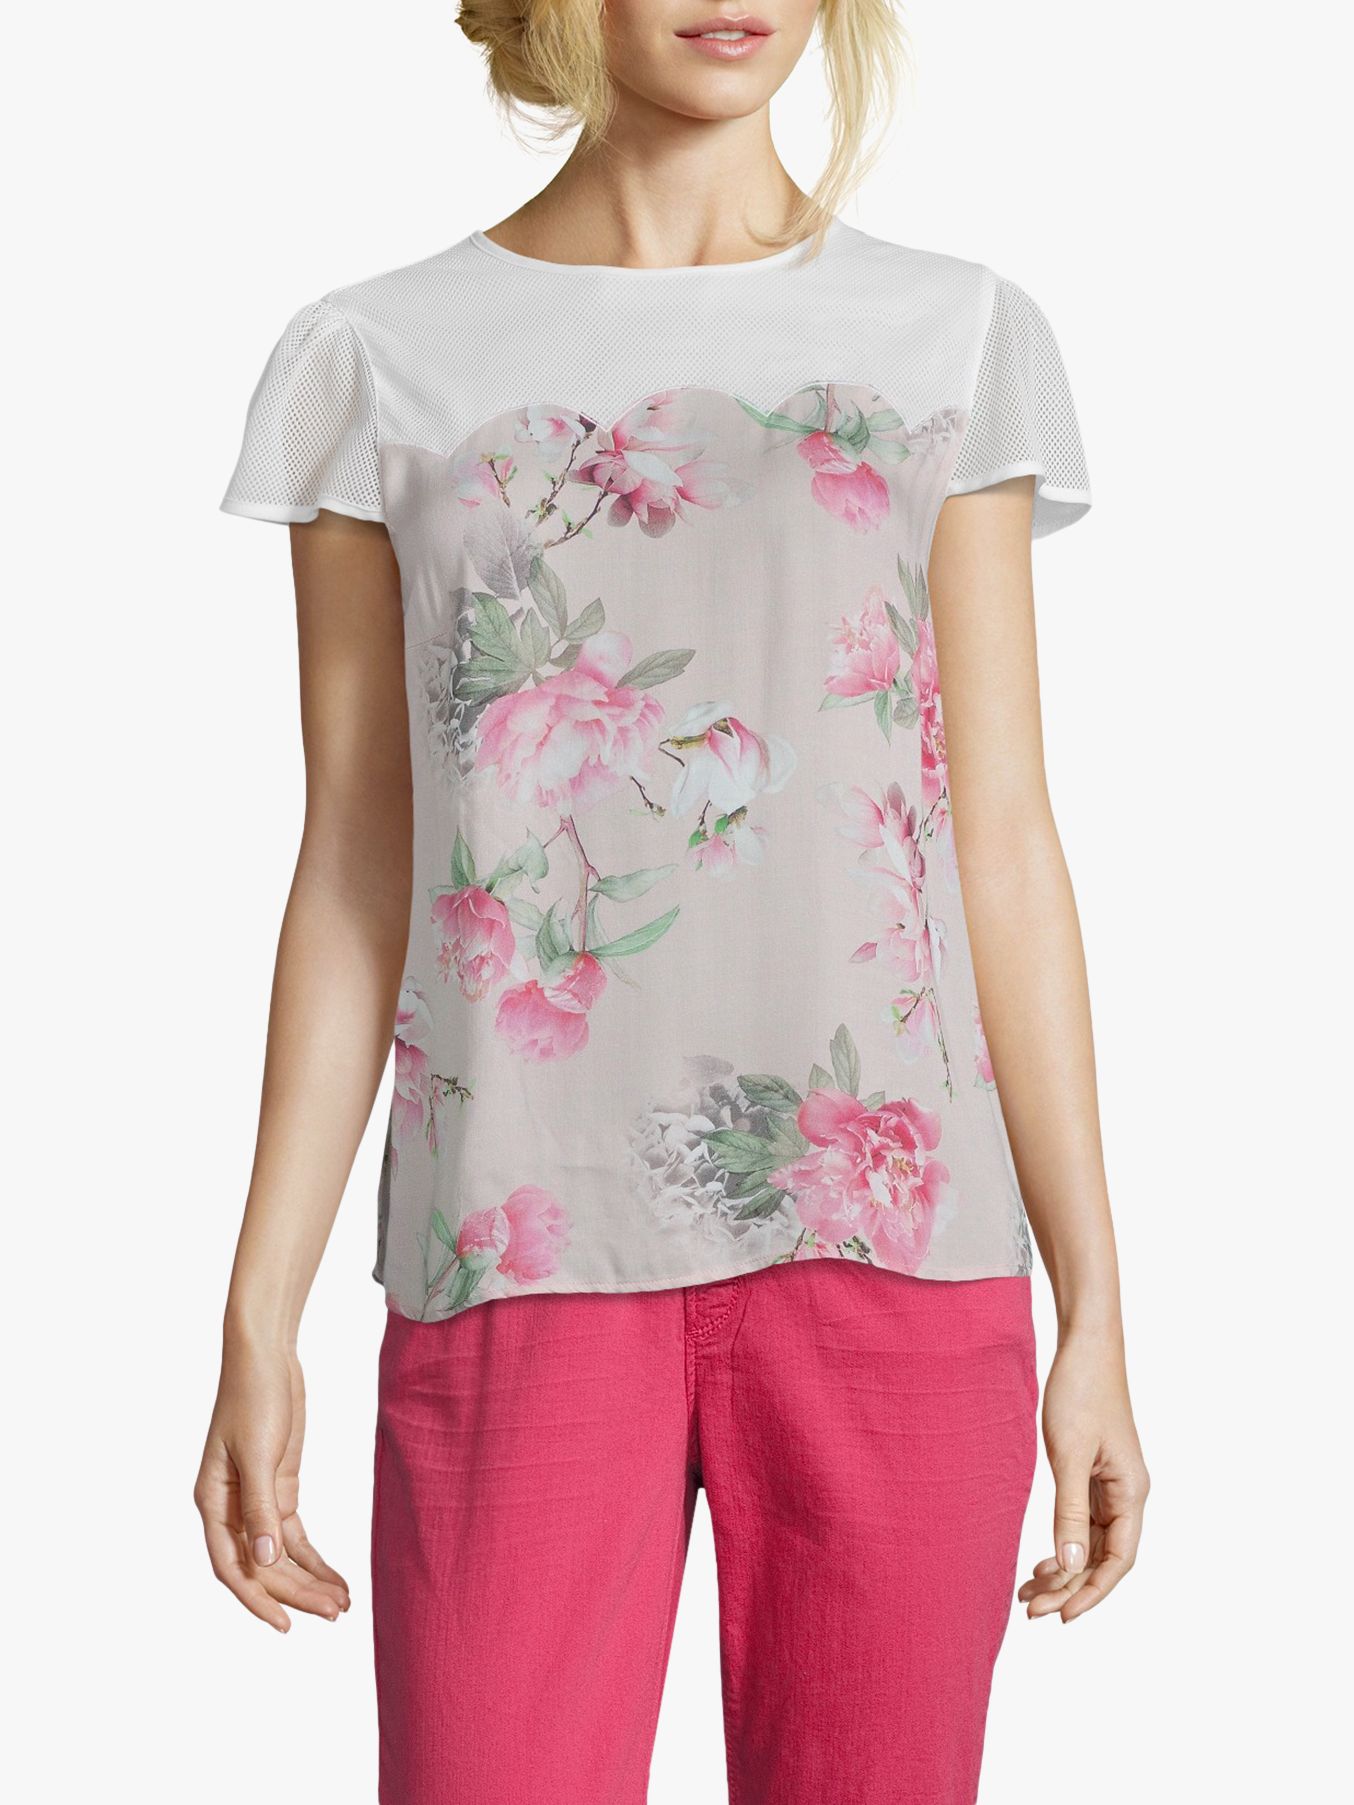 Betty & Co. Floral Print Blouse, Rose/White